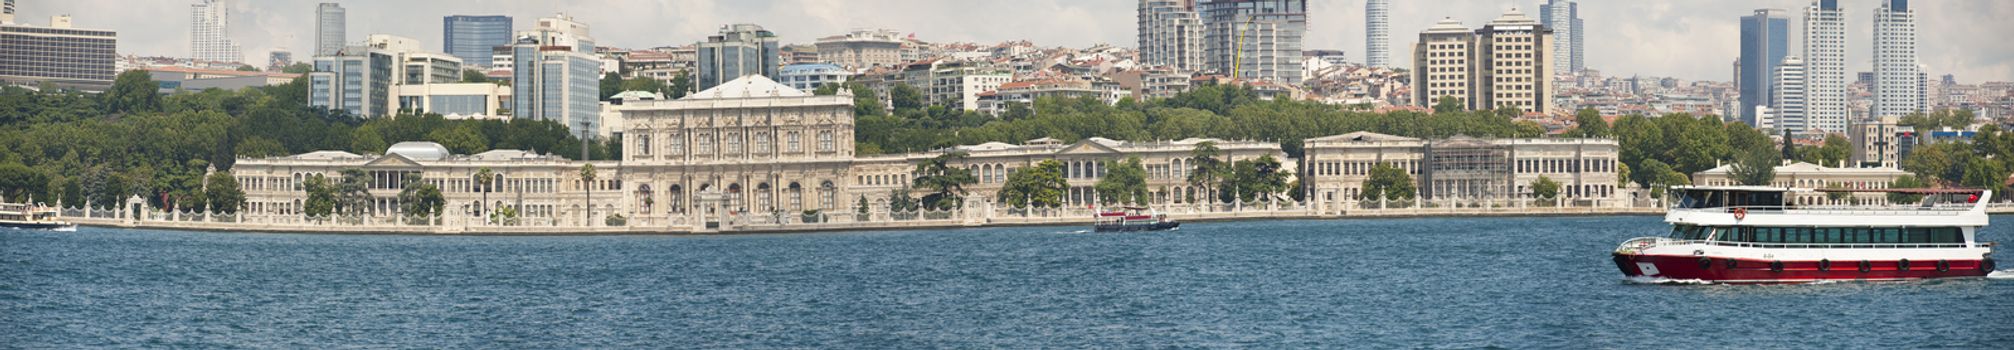 Panoramic view of Dolmabahce palace on bosphorus river in istanbul turkey with boat and cityscape in background